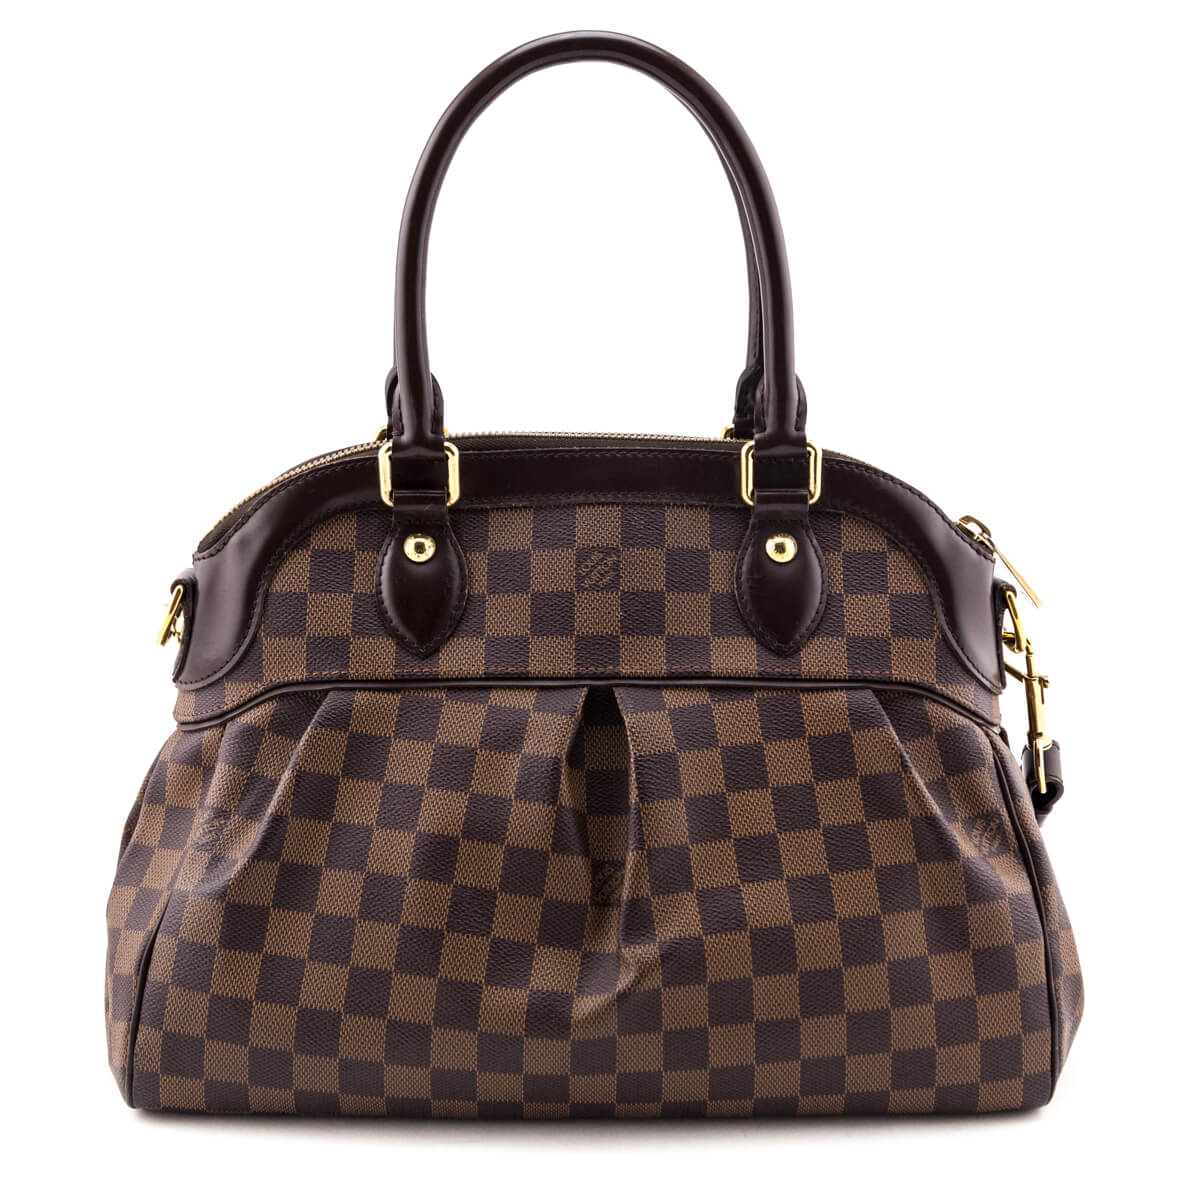 Authentic pre-owned luxury designers handbags and accessories shop